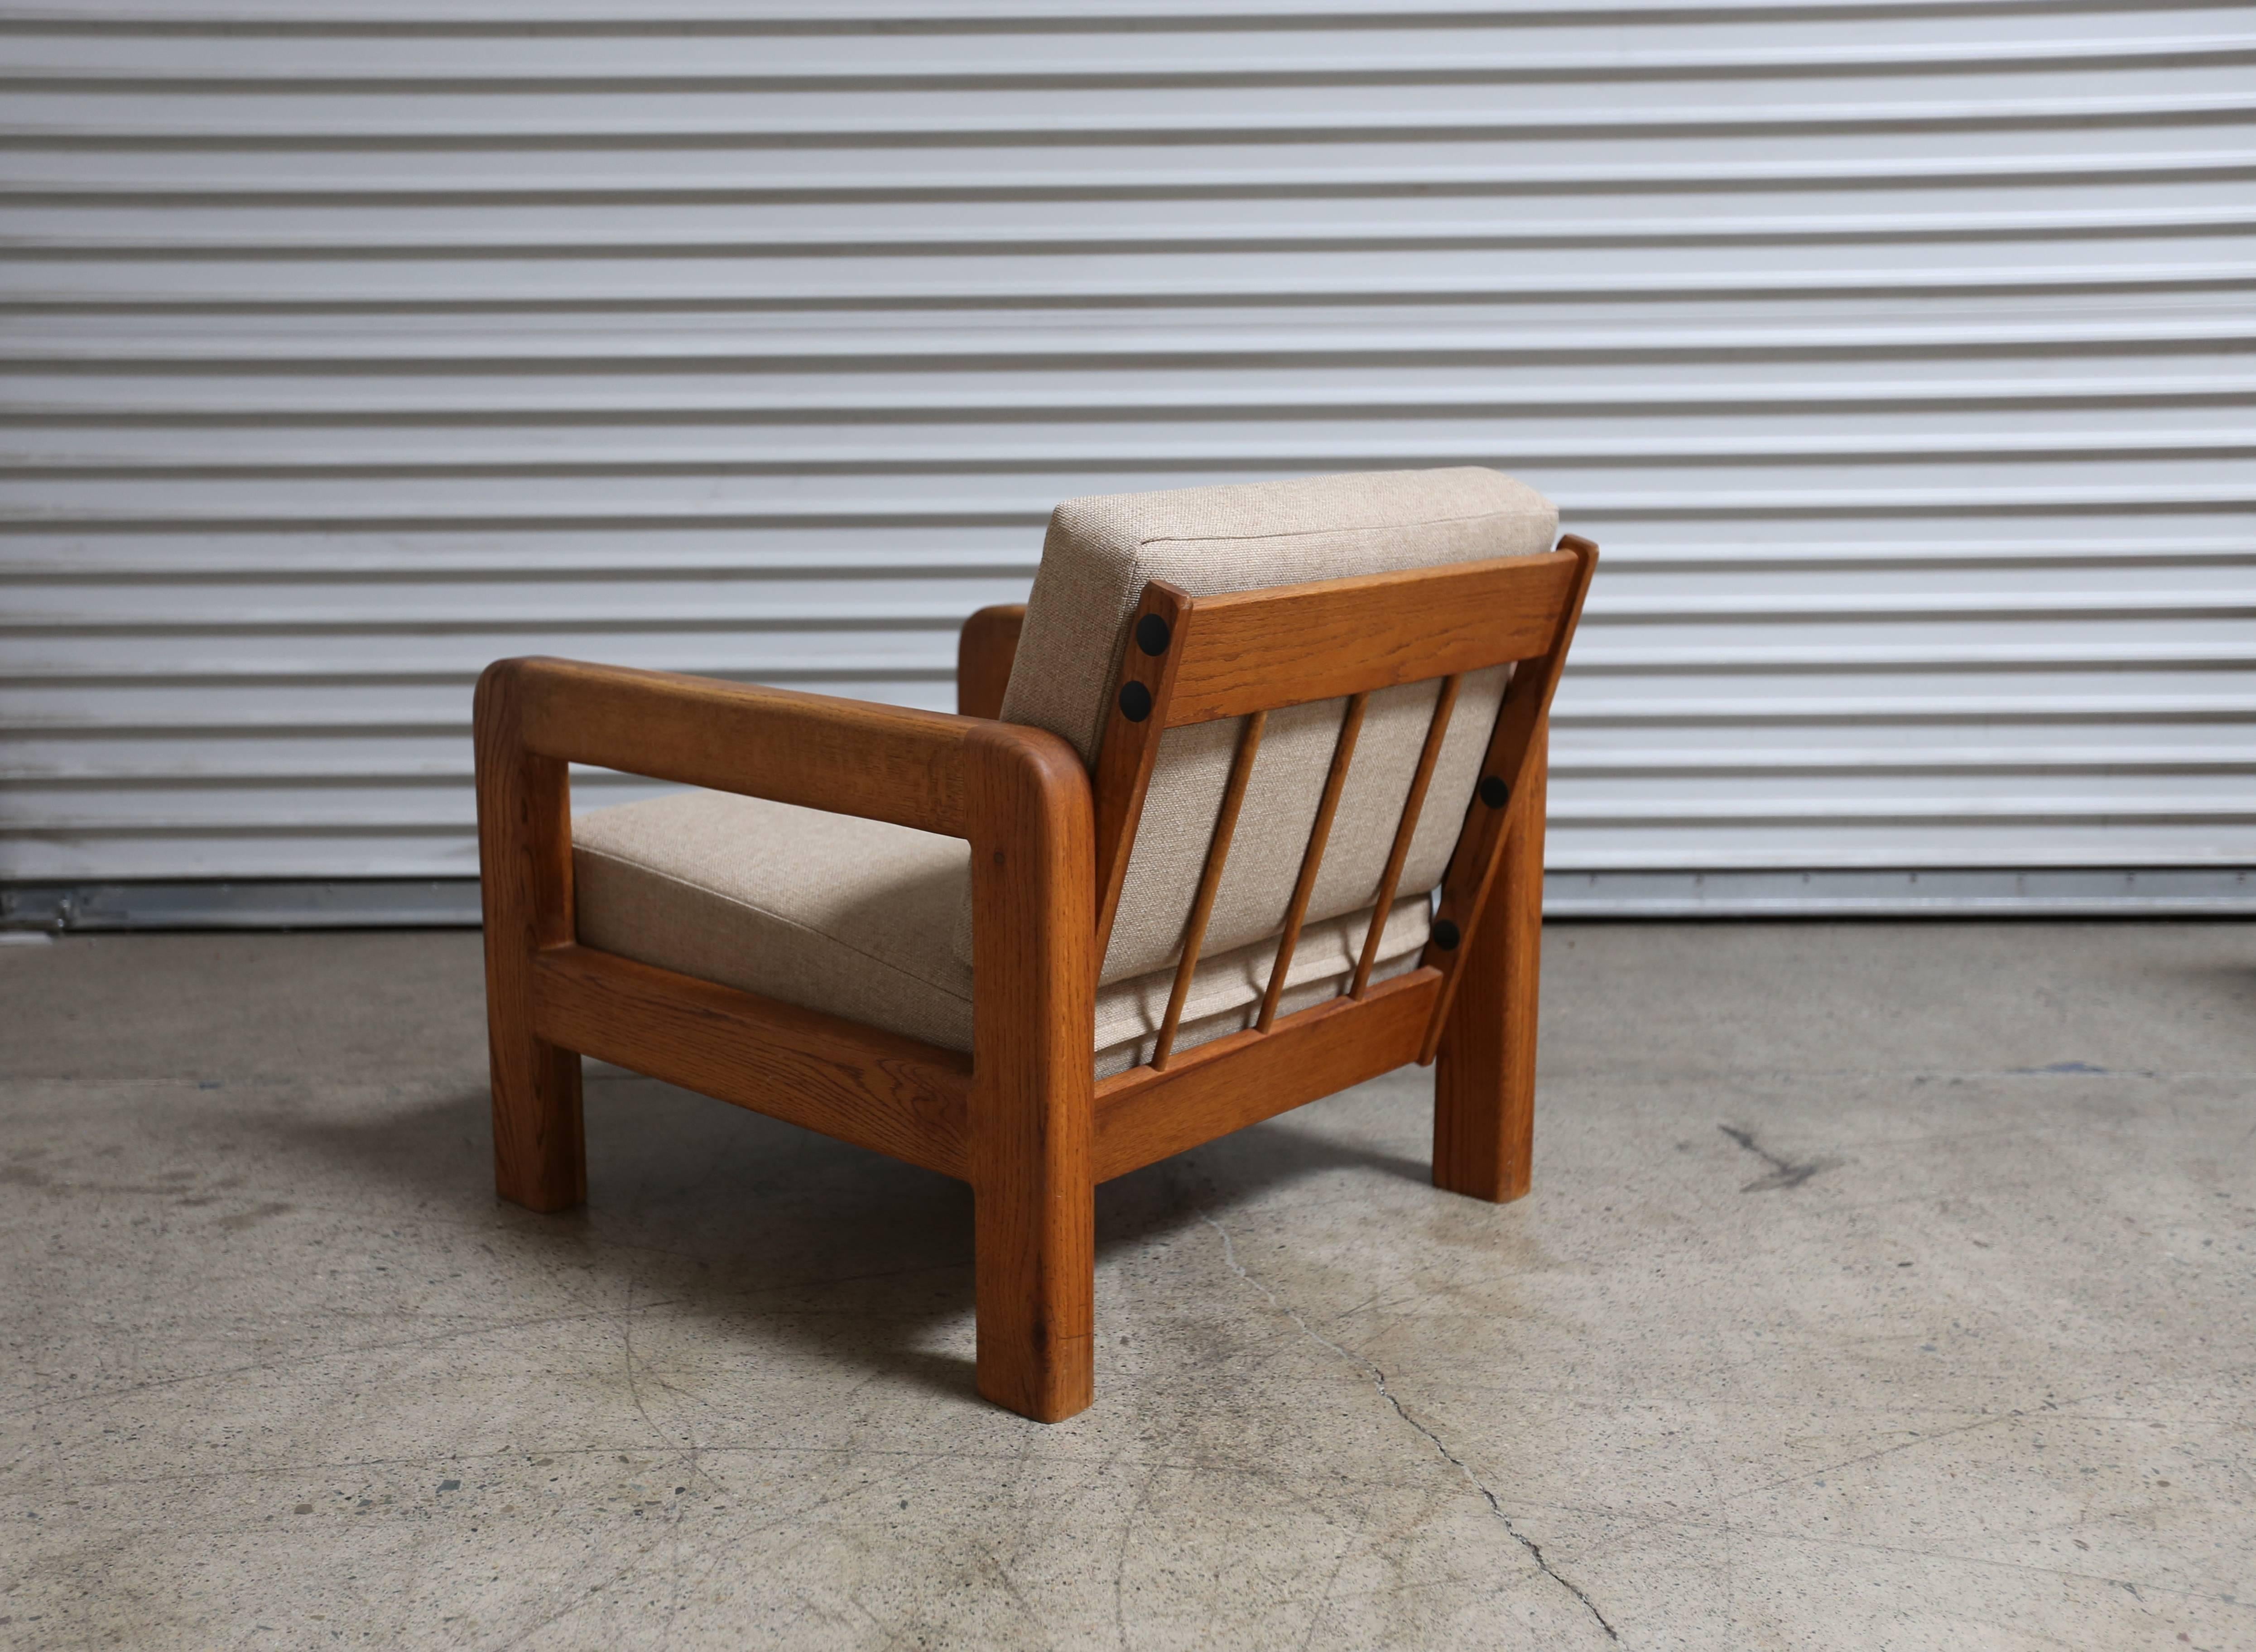 Pair of massive oak armchairs in the California Mid-Century Modern style with upholstery.